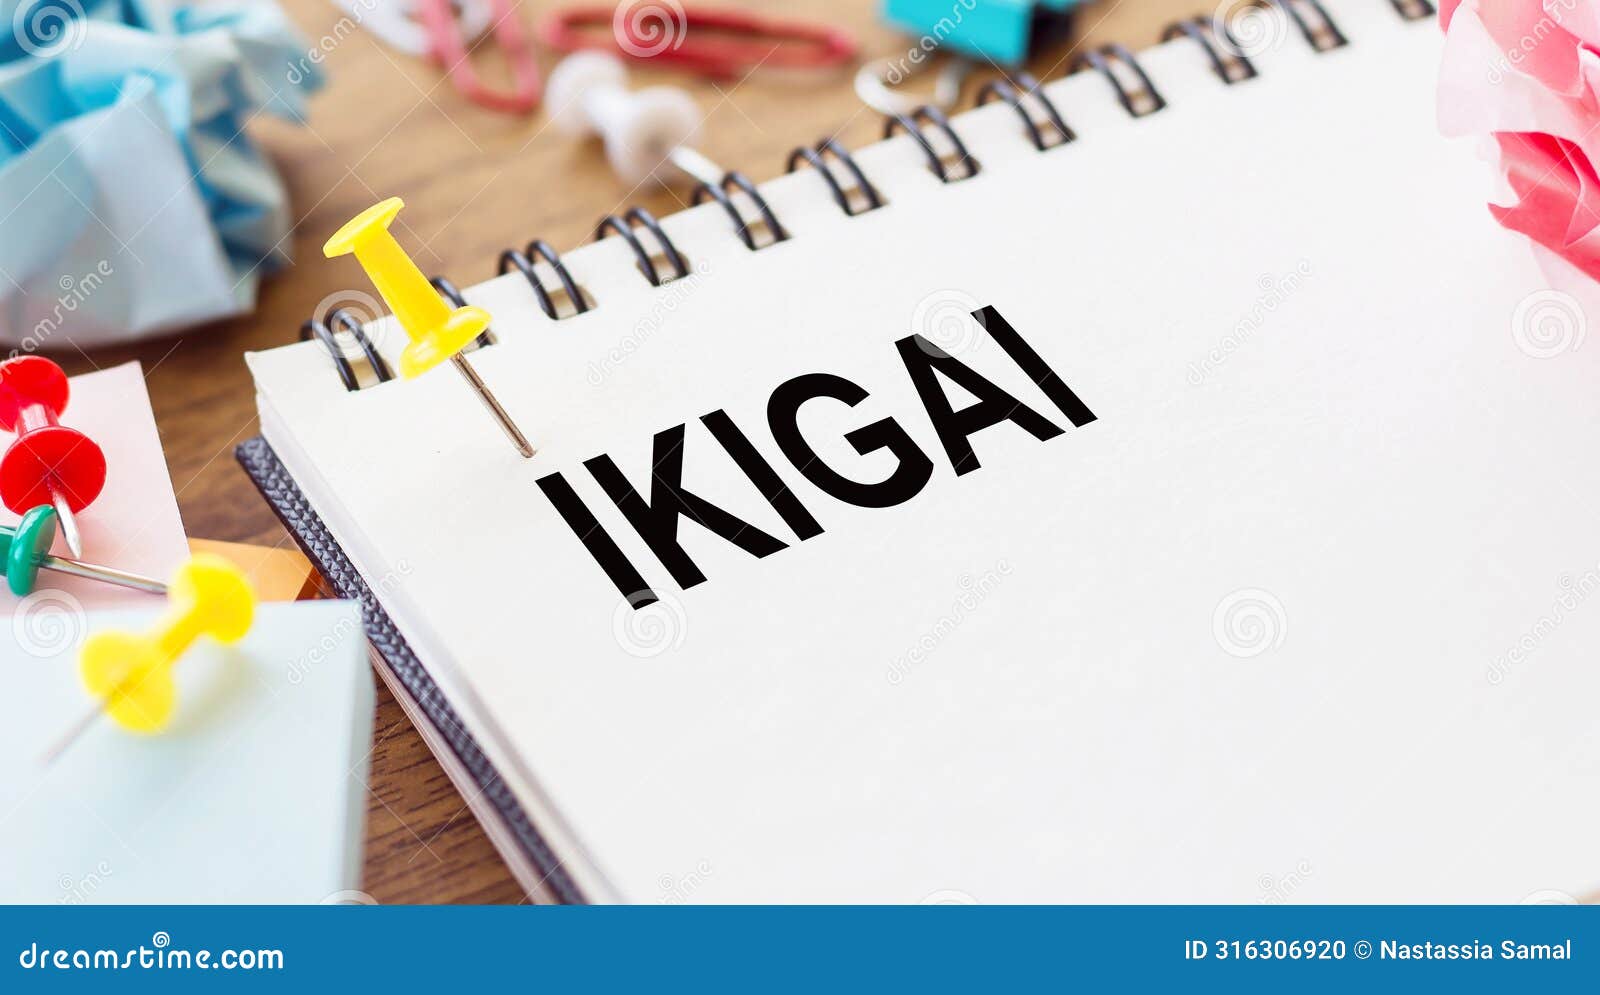 notebook featuring the word ikigai surrounded by colorful push pins and gifts